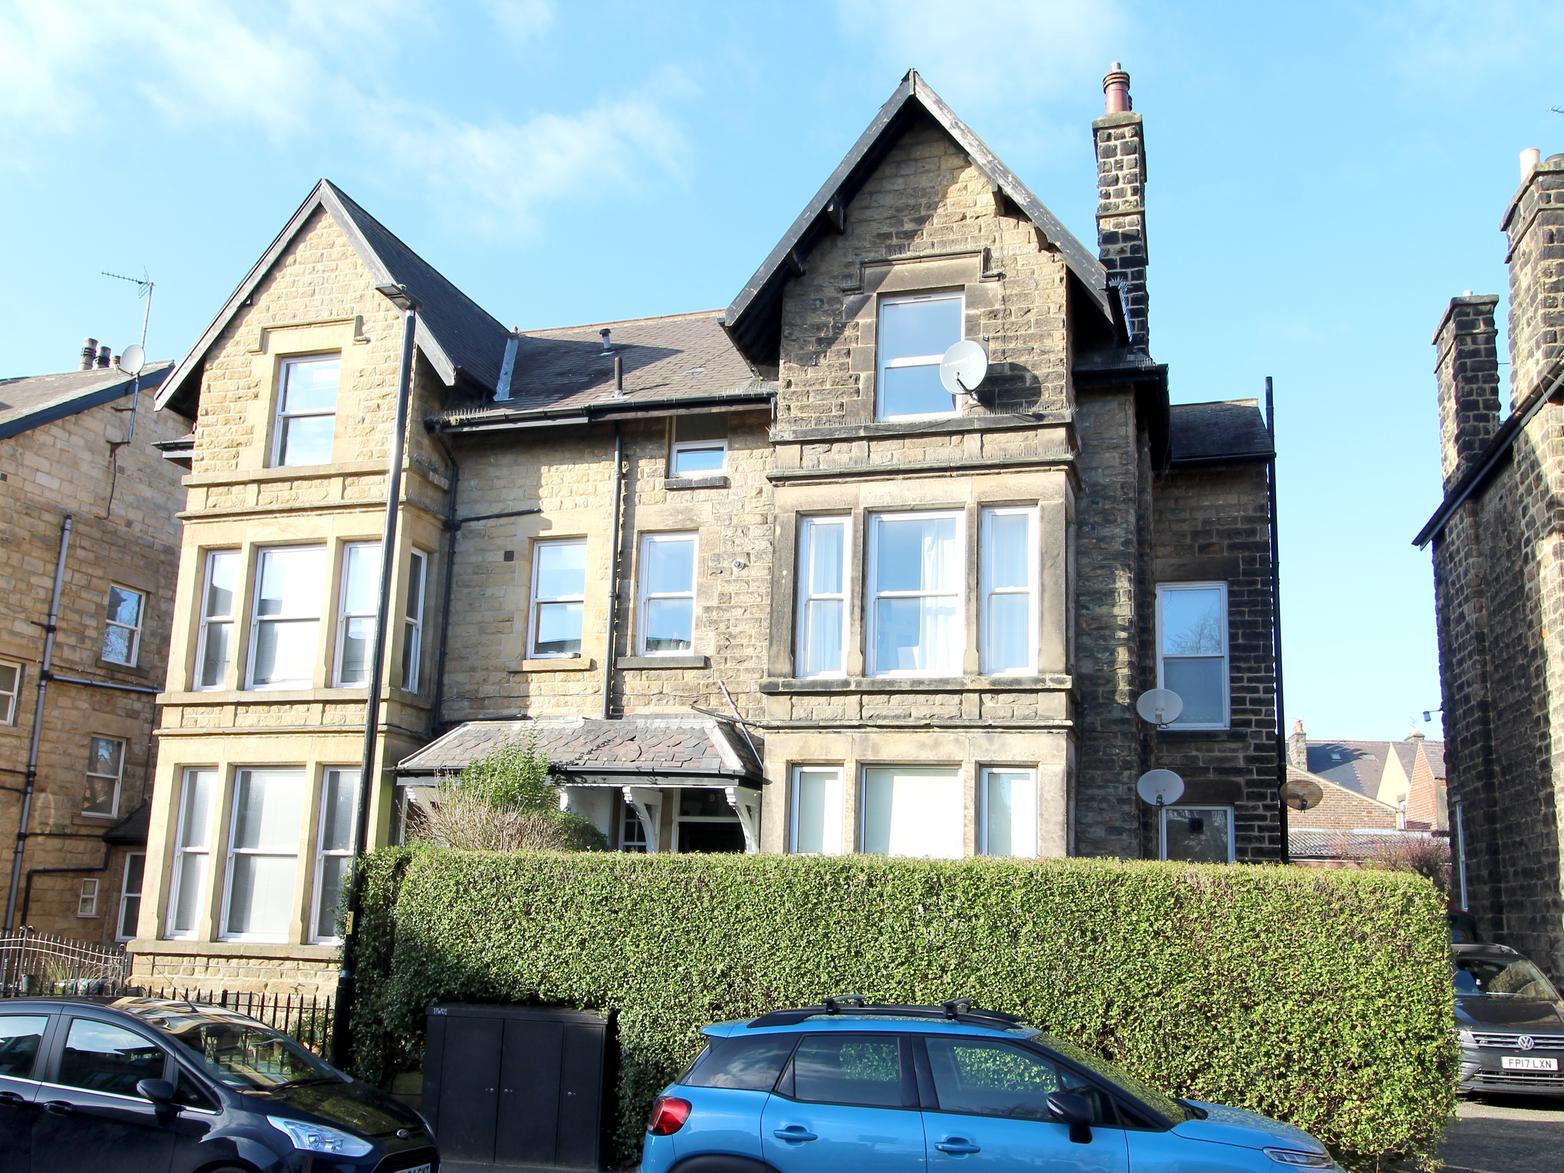 A newly renovated two bedroom, second floor apartment forming part of a stone-built, semi detached property, which is ideally situated within easy walking distance of the Harrogate town centre and the many amenities it has to offer.